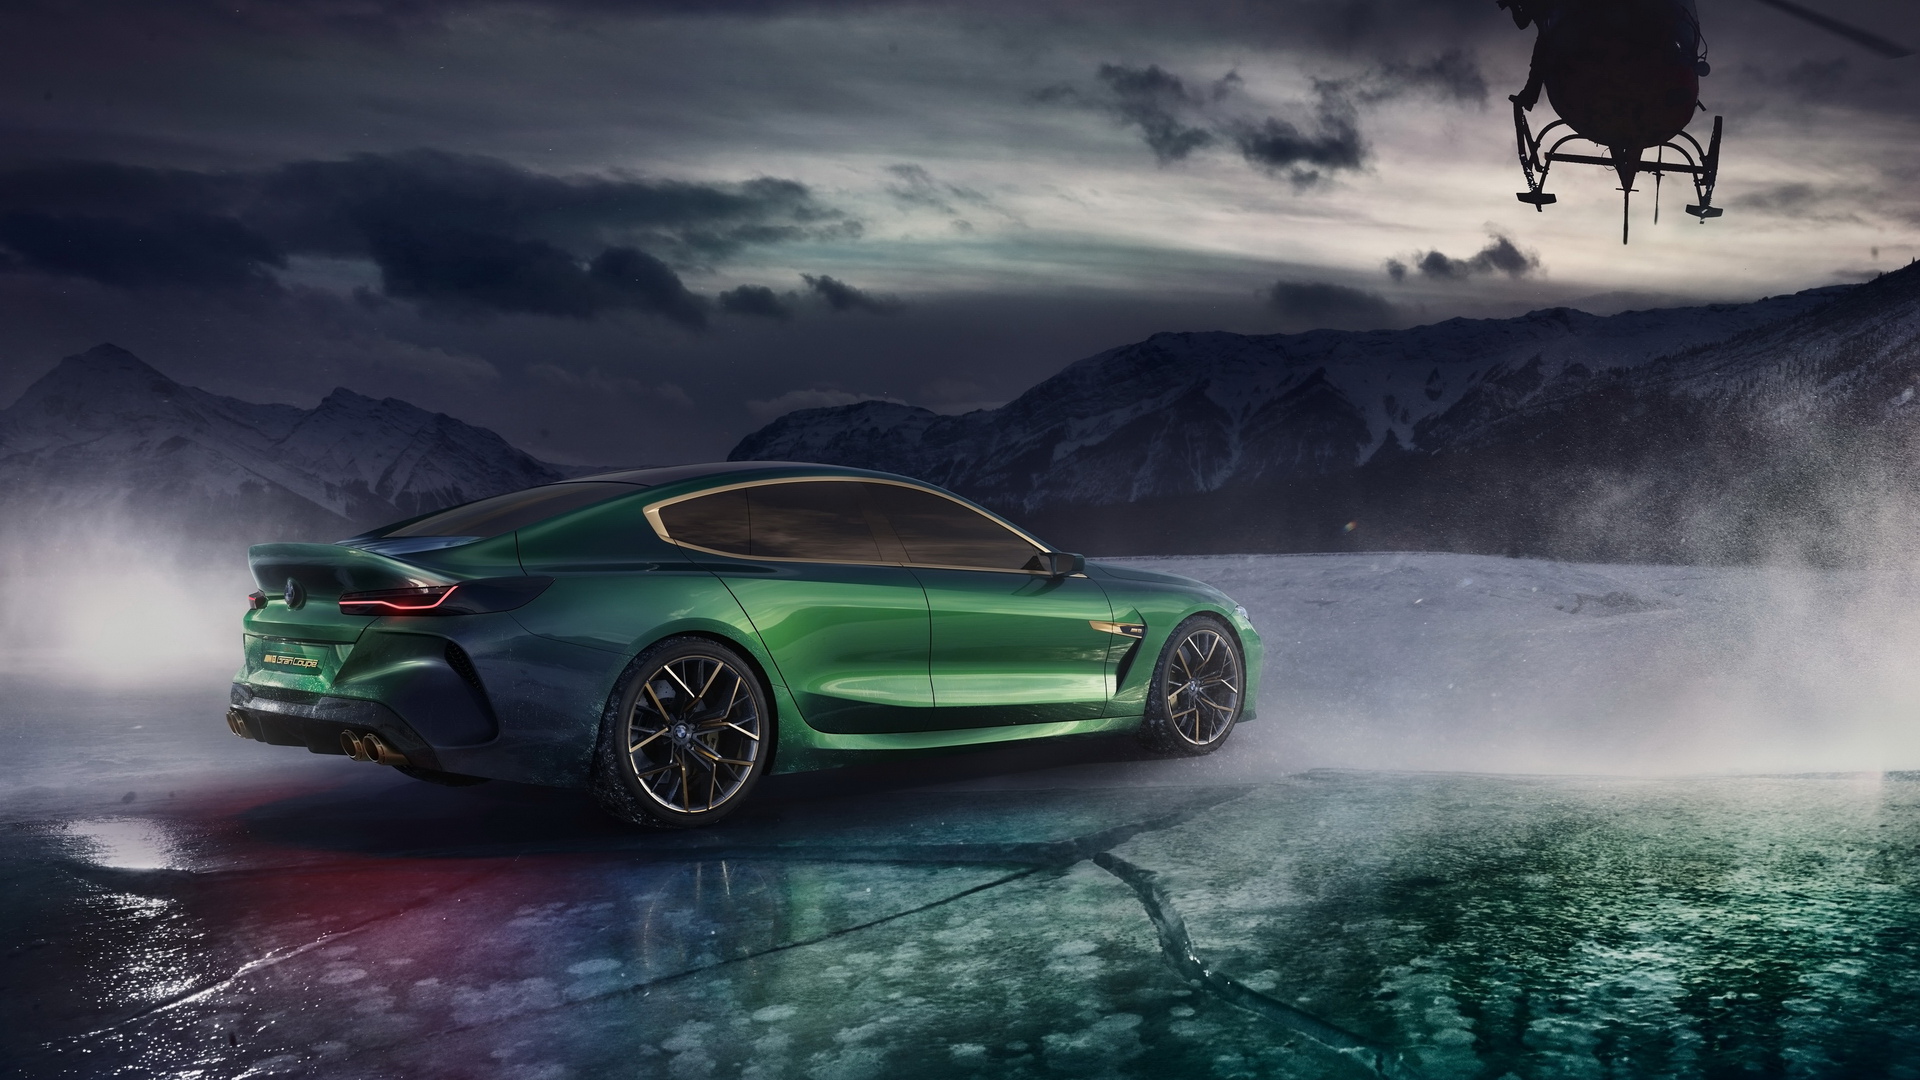 General 1920x1080 BMW car BMW 8 series BMW G14/G15/G16 green cars ice frozen lake helicopters mountains